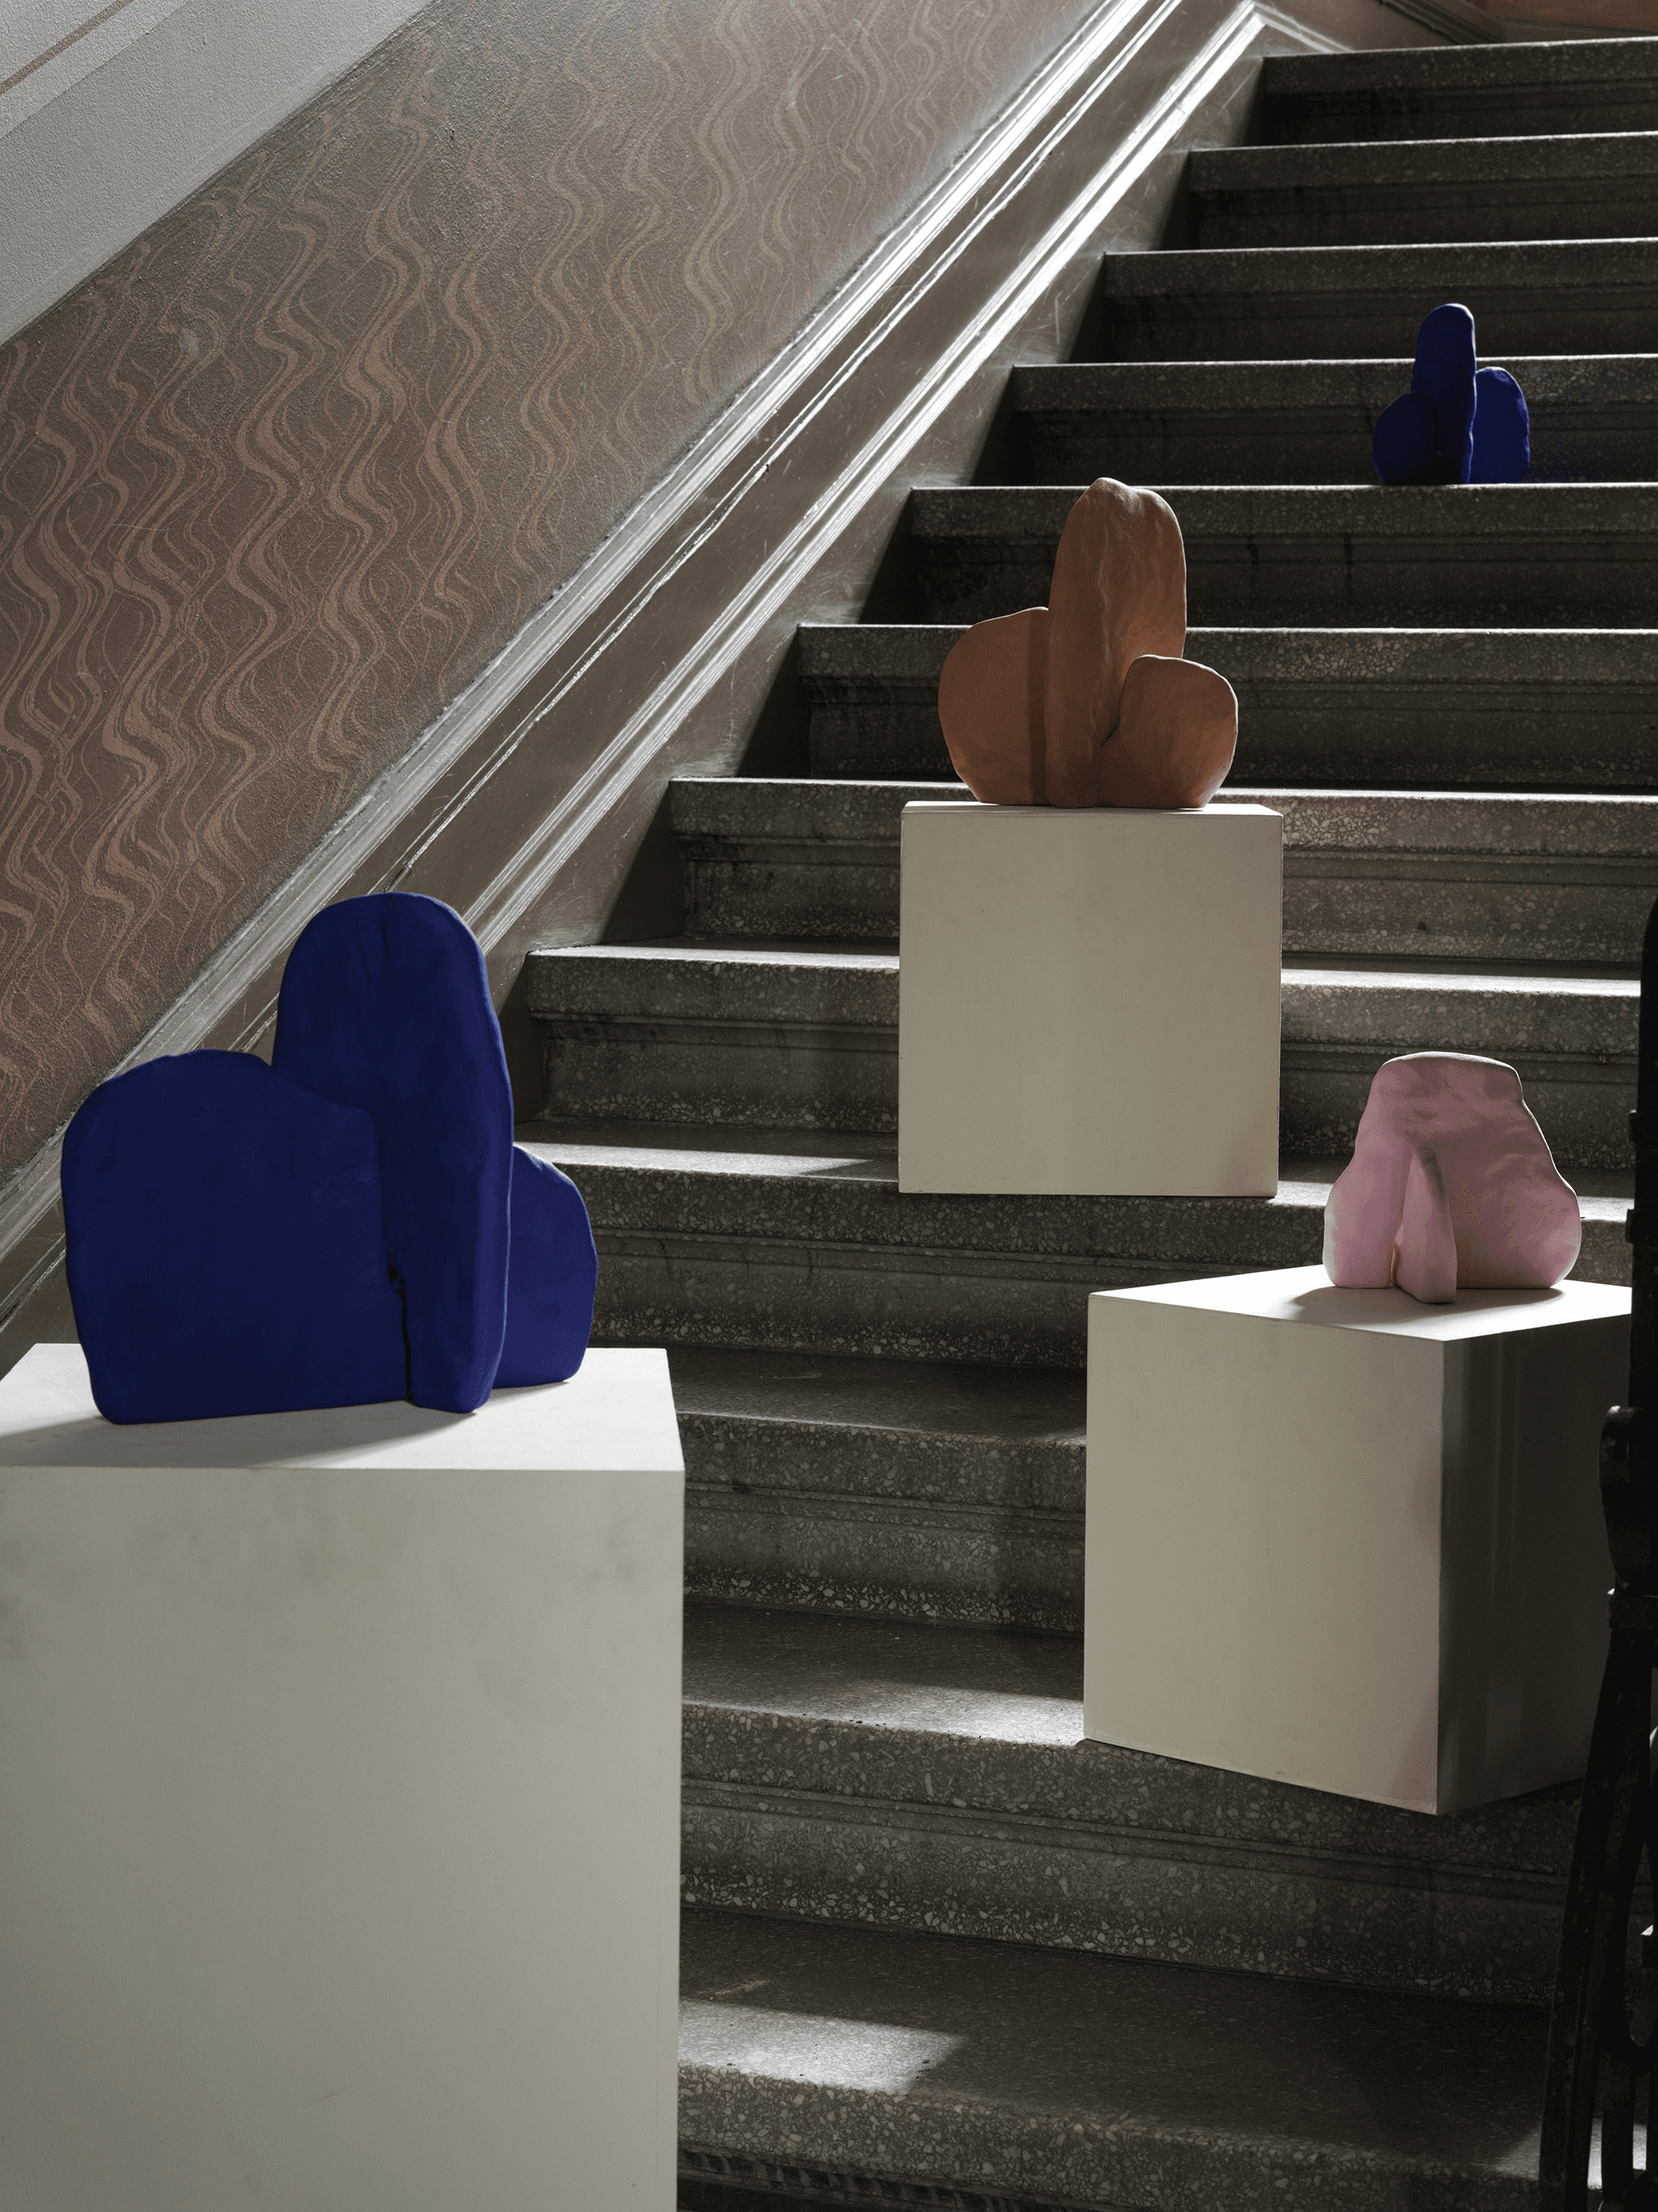 Stunning artwork made in cooperation with Mina Karami, displayed on podiums along a staircase. Styled by Emma Persson Lagerberg and photographed by Petra Bindel